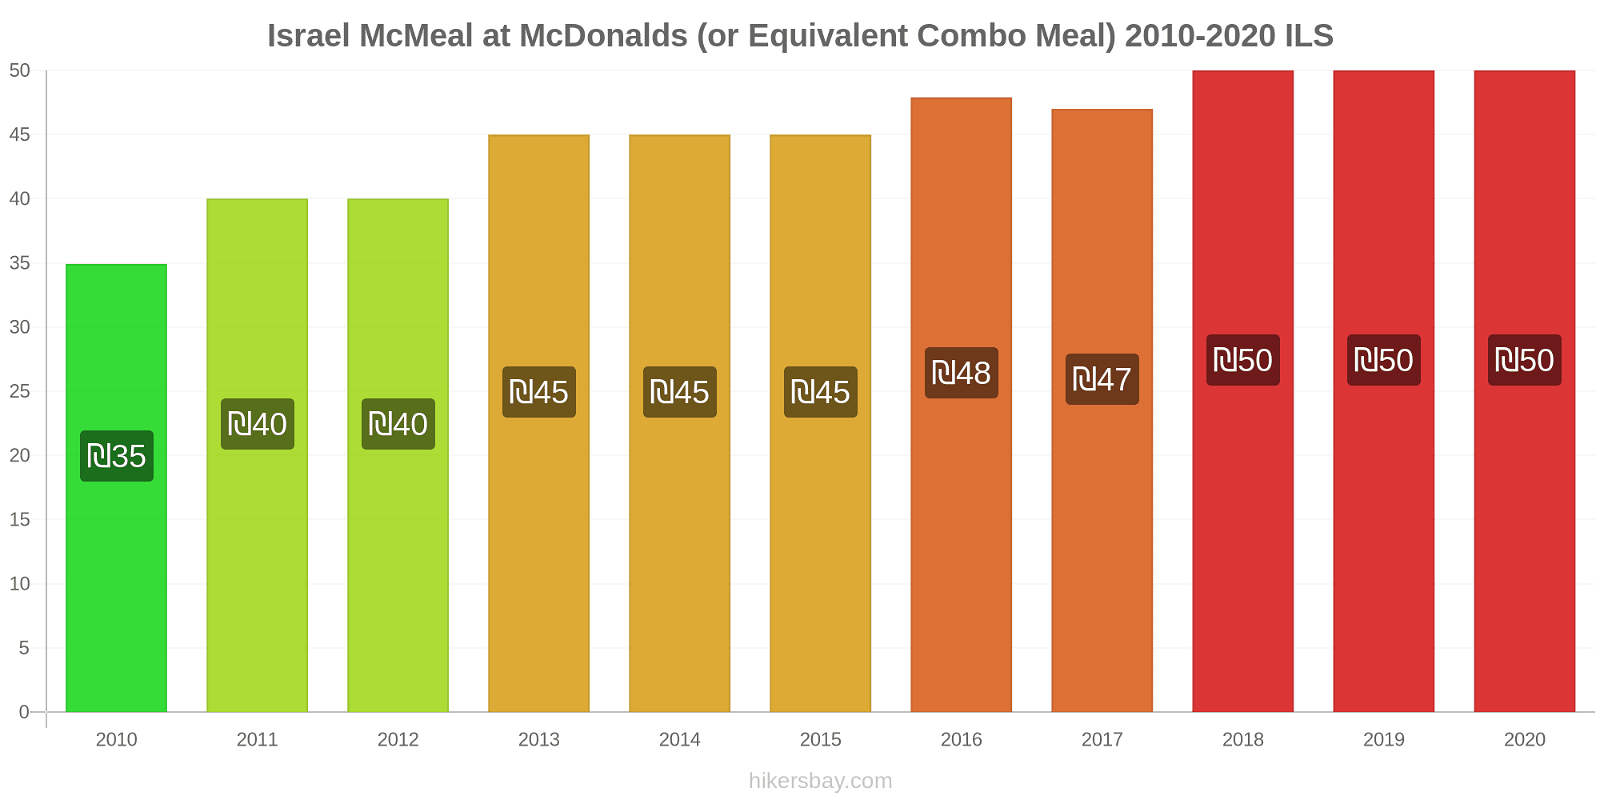 Israel price changes McMeal at McDonalds (or Equivalent Combo Meal) hikersbay.com